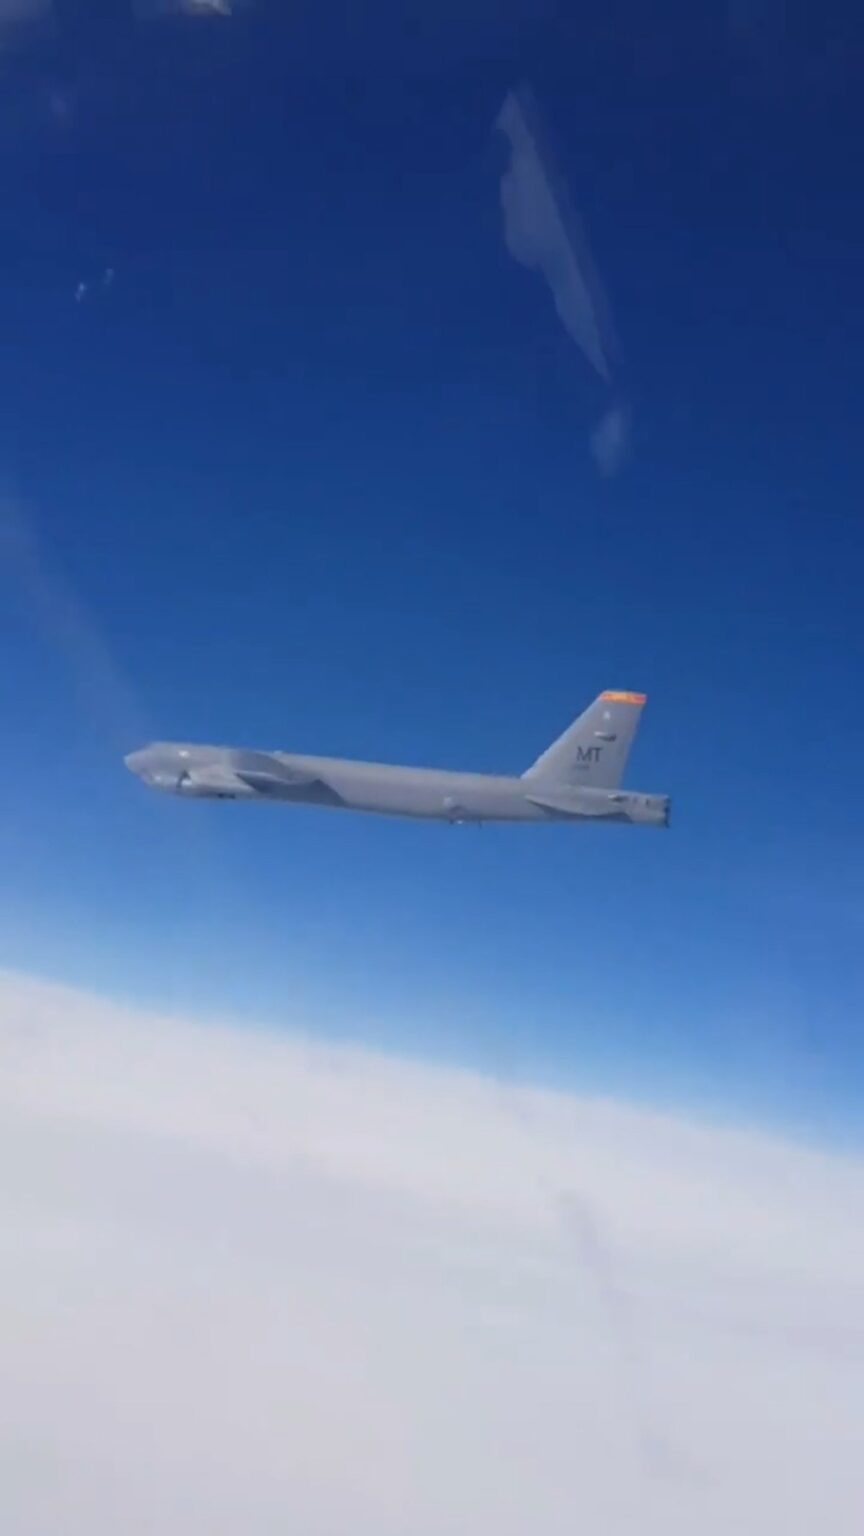 US nuclear bomber and Russian fighter jet in tense stand-off over Baltic Sea